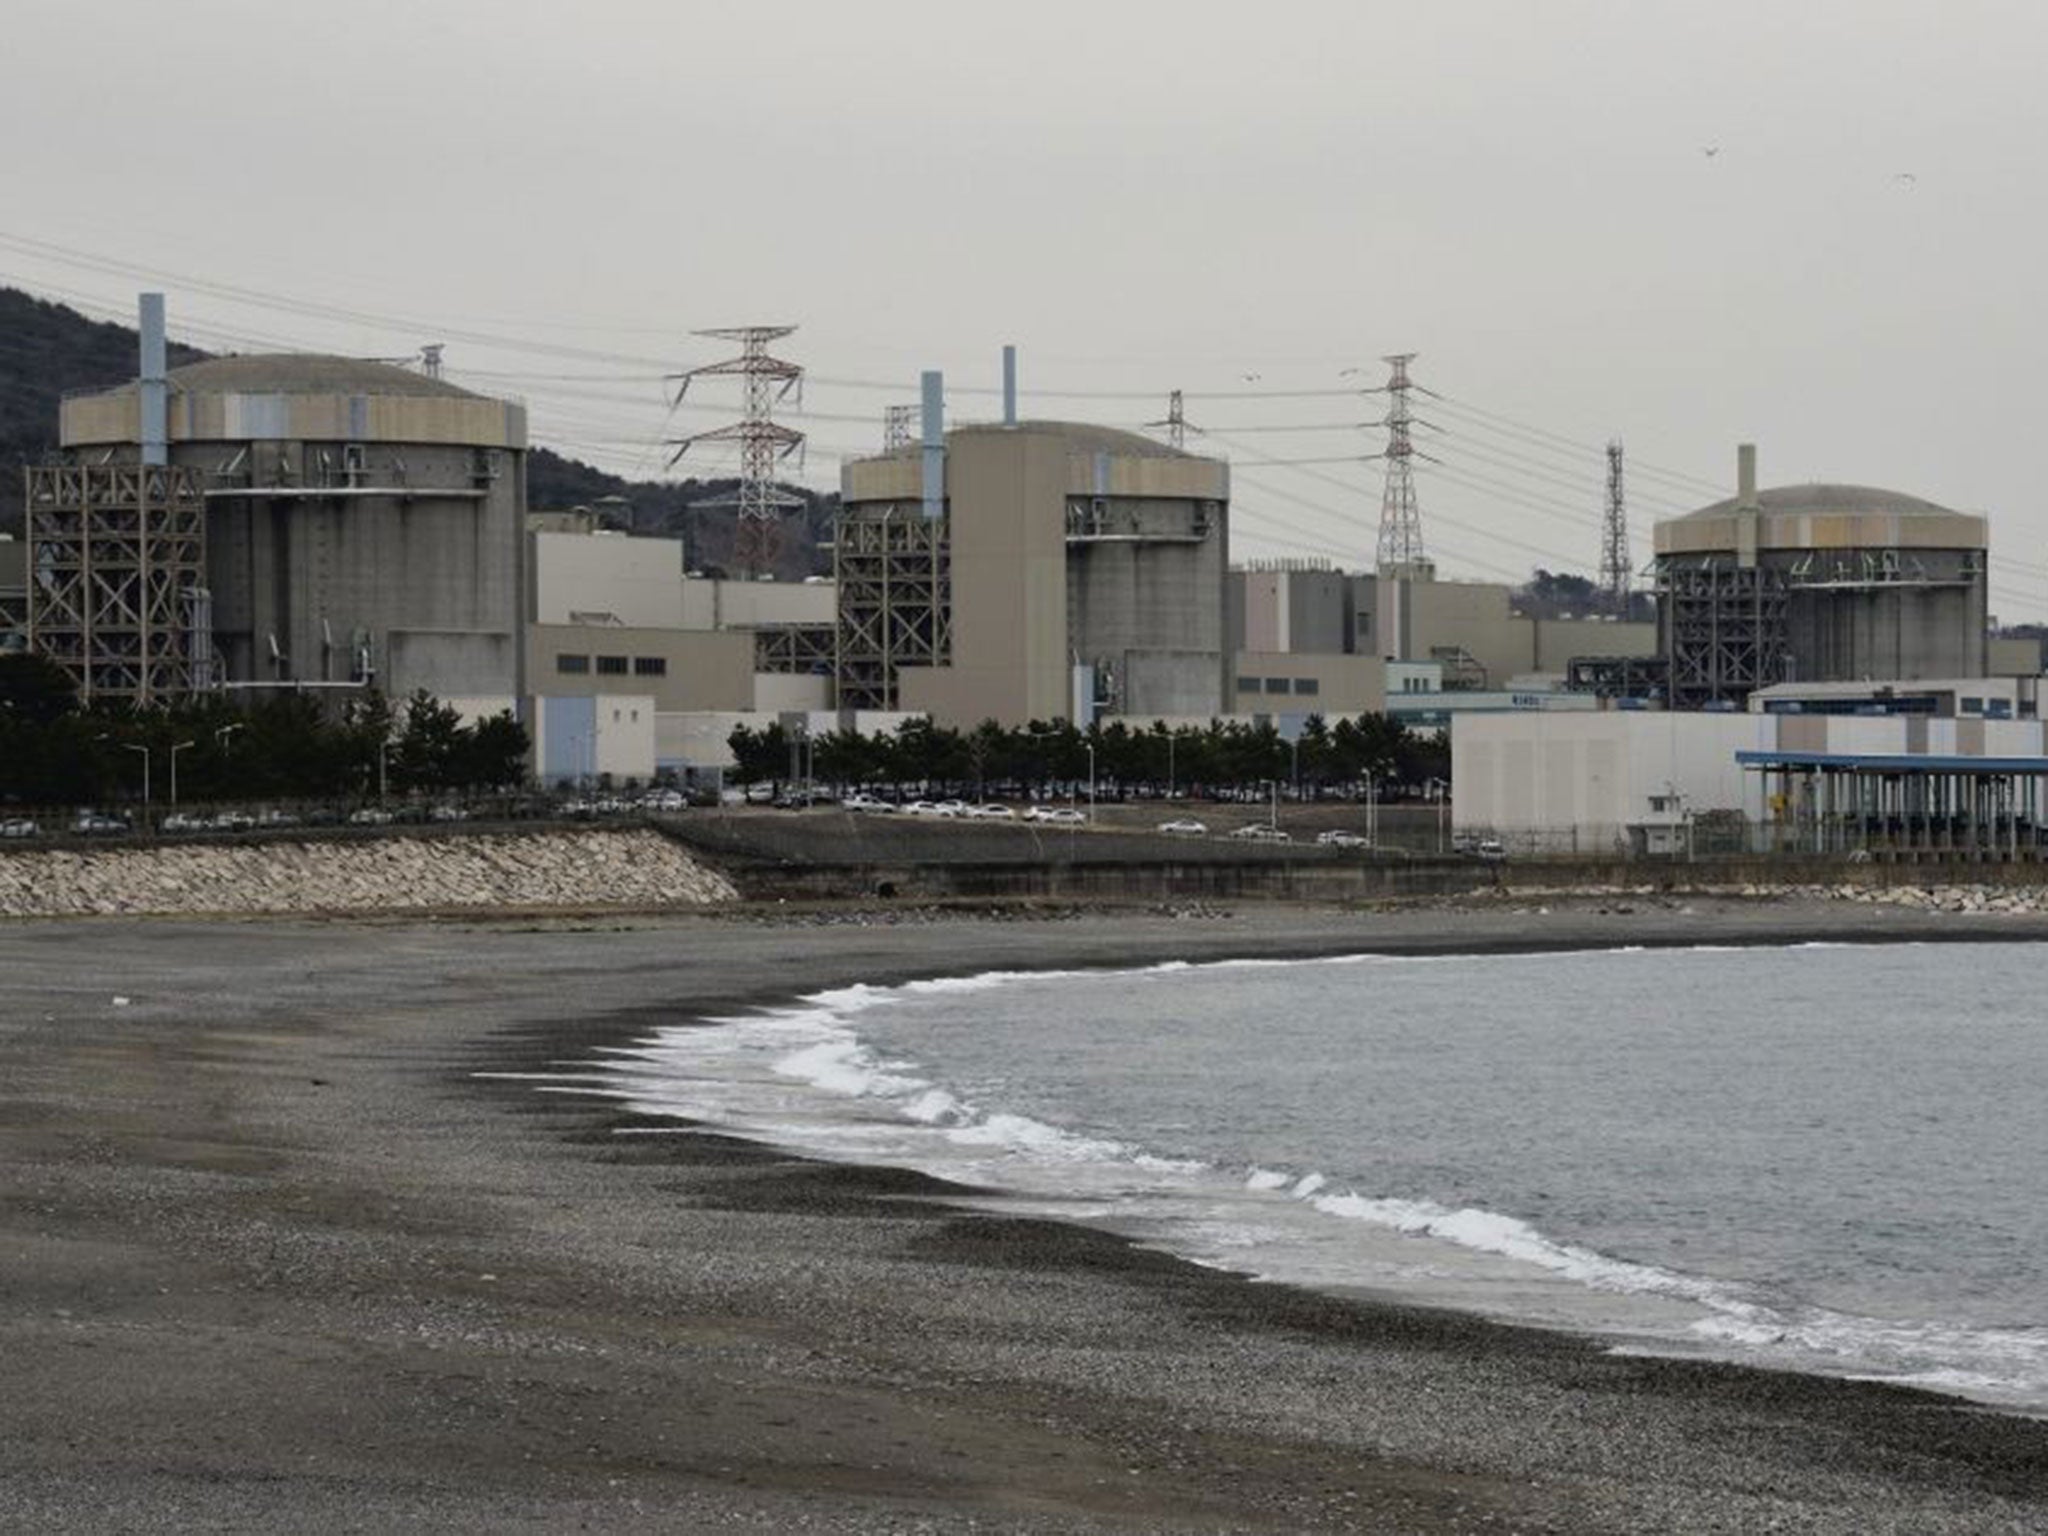 Reactors of the nuclear power plant in Wolseong, South Korea, which was hacked